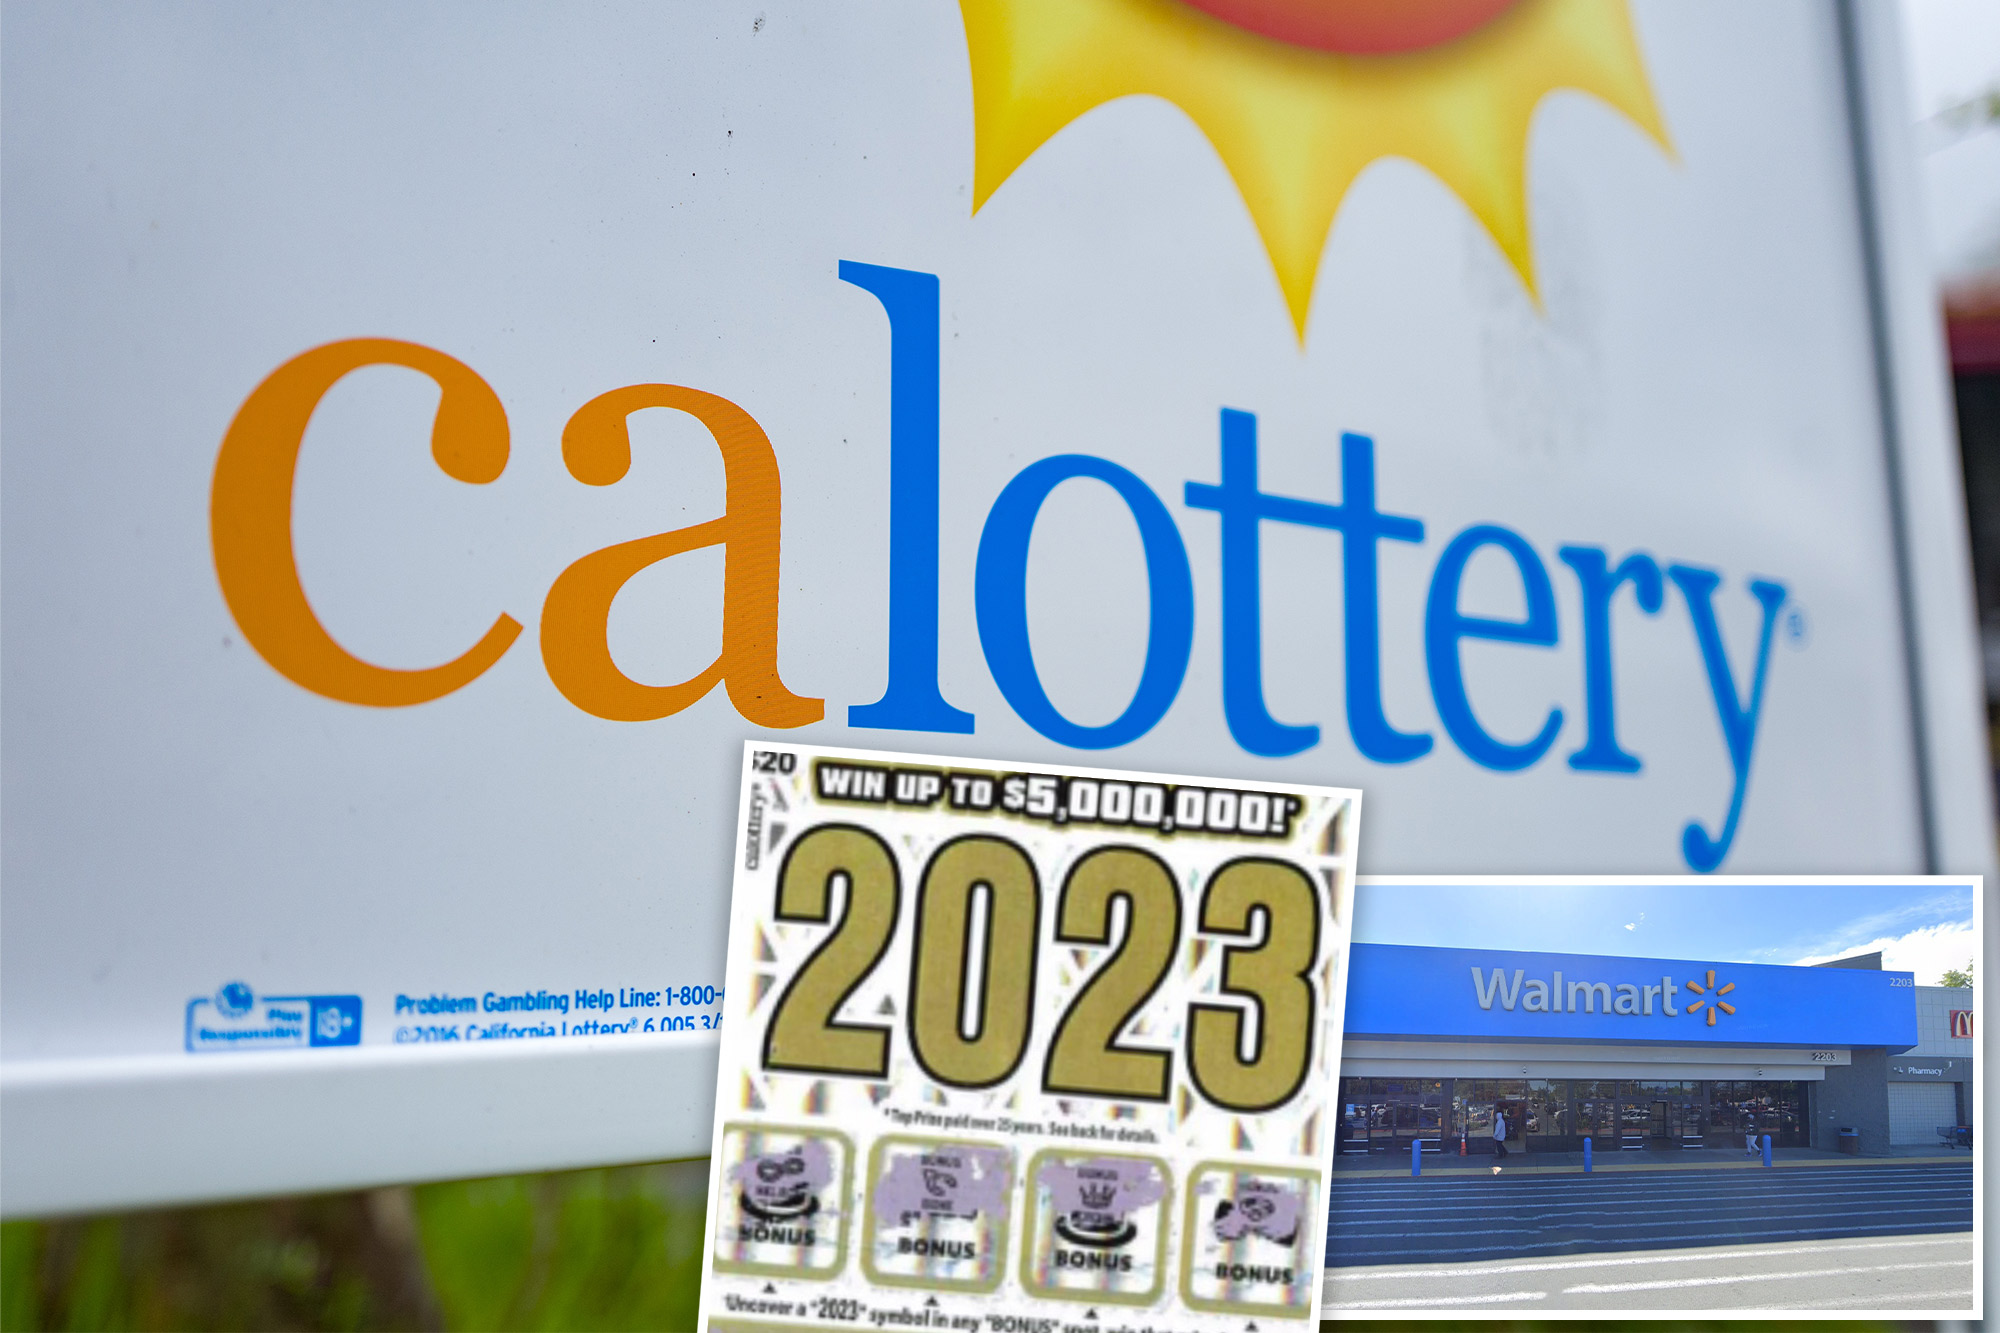 Once-homeless California woman wins $5 million from lottery